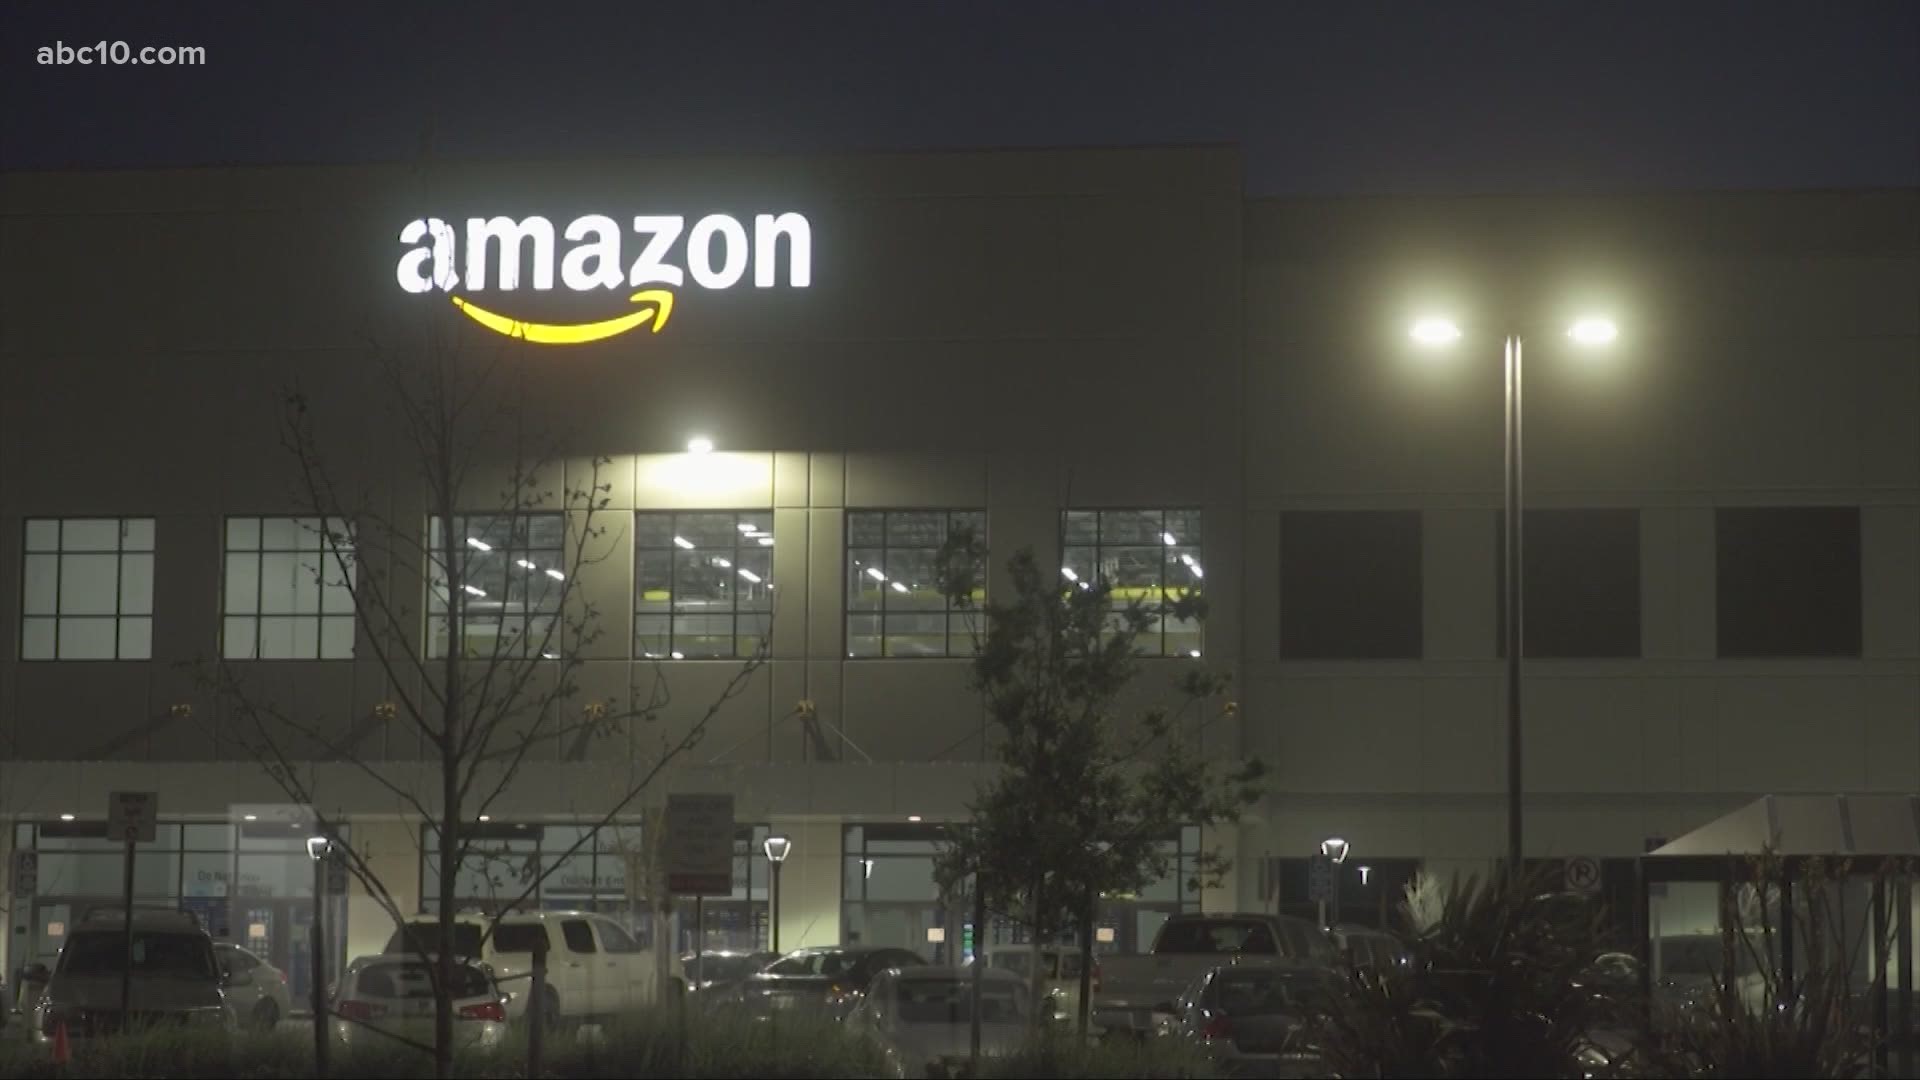 Amazon Spokesperson Lisa Levandowski said the company made more than 150 process updates with the goal to keep its workers safe from the coronavirus.